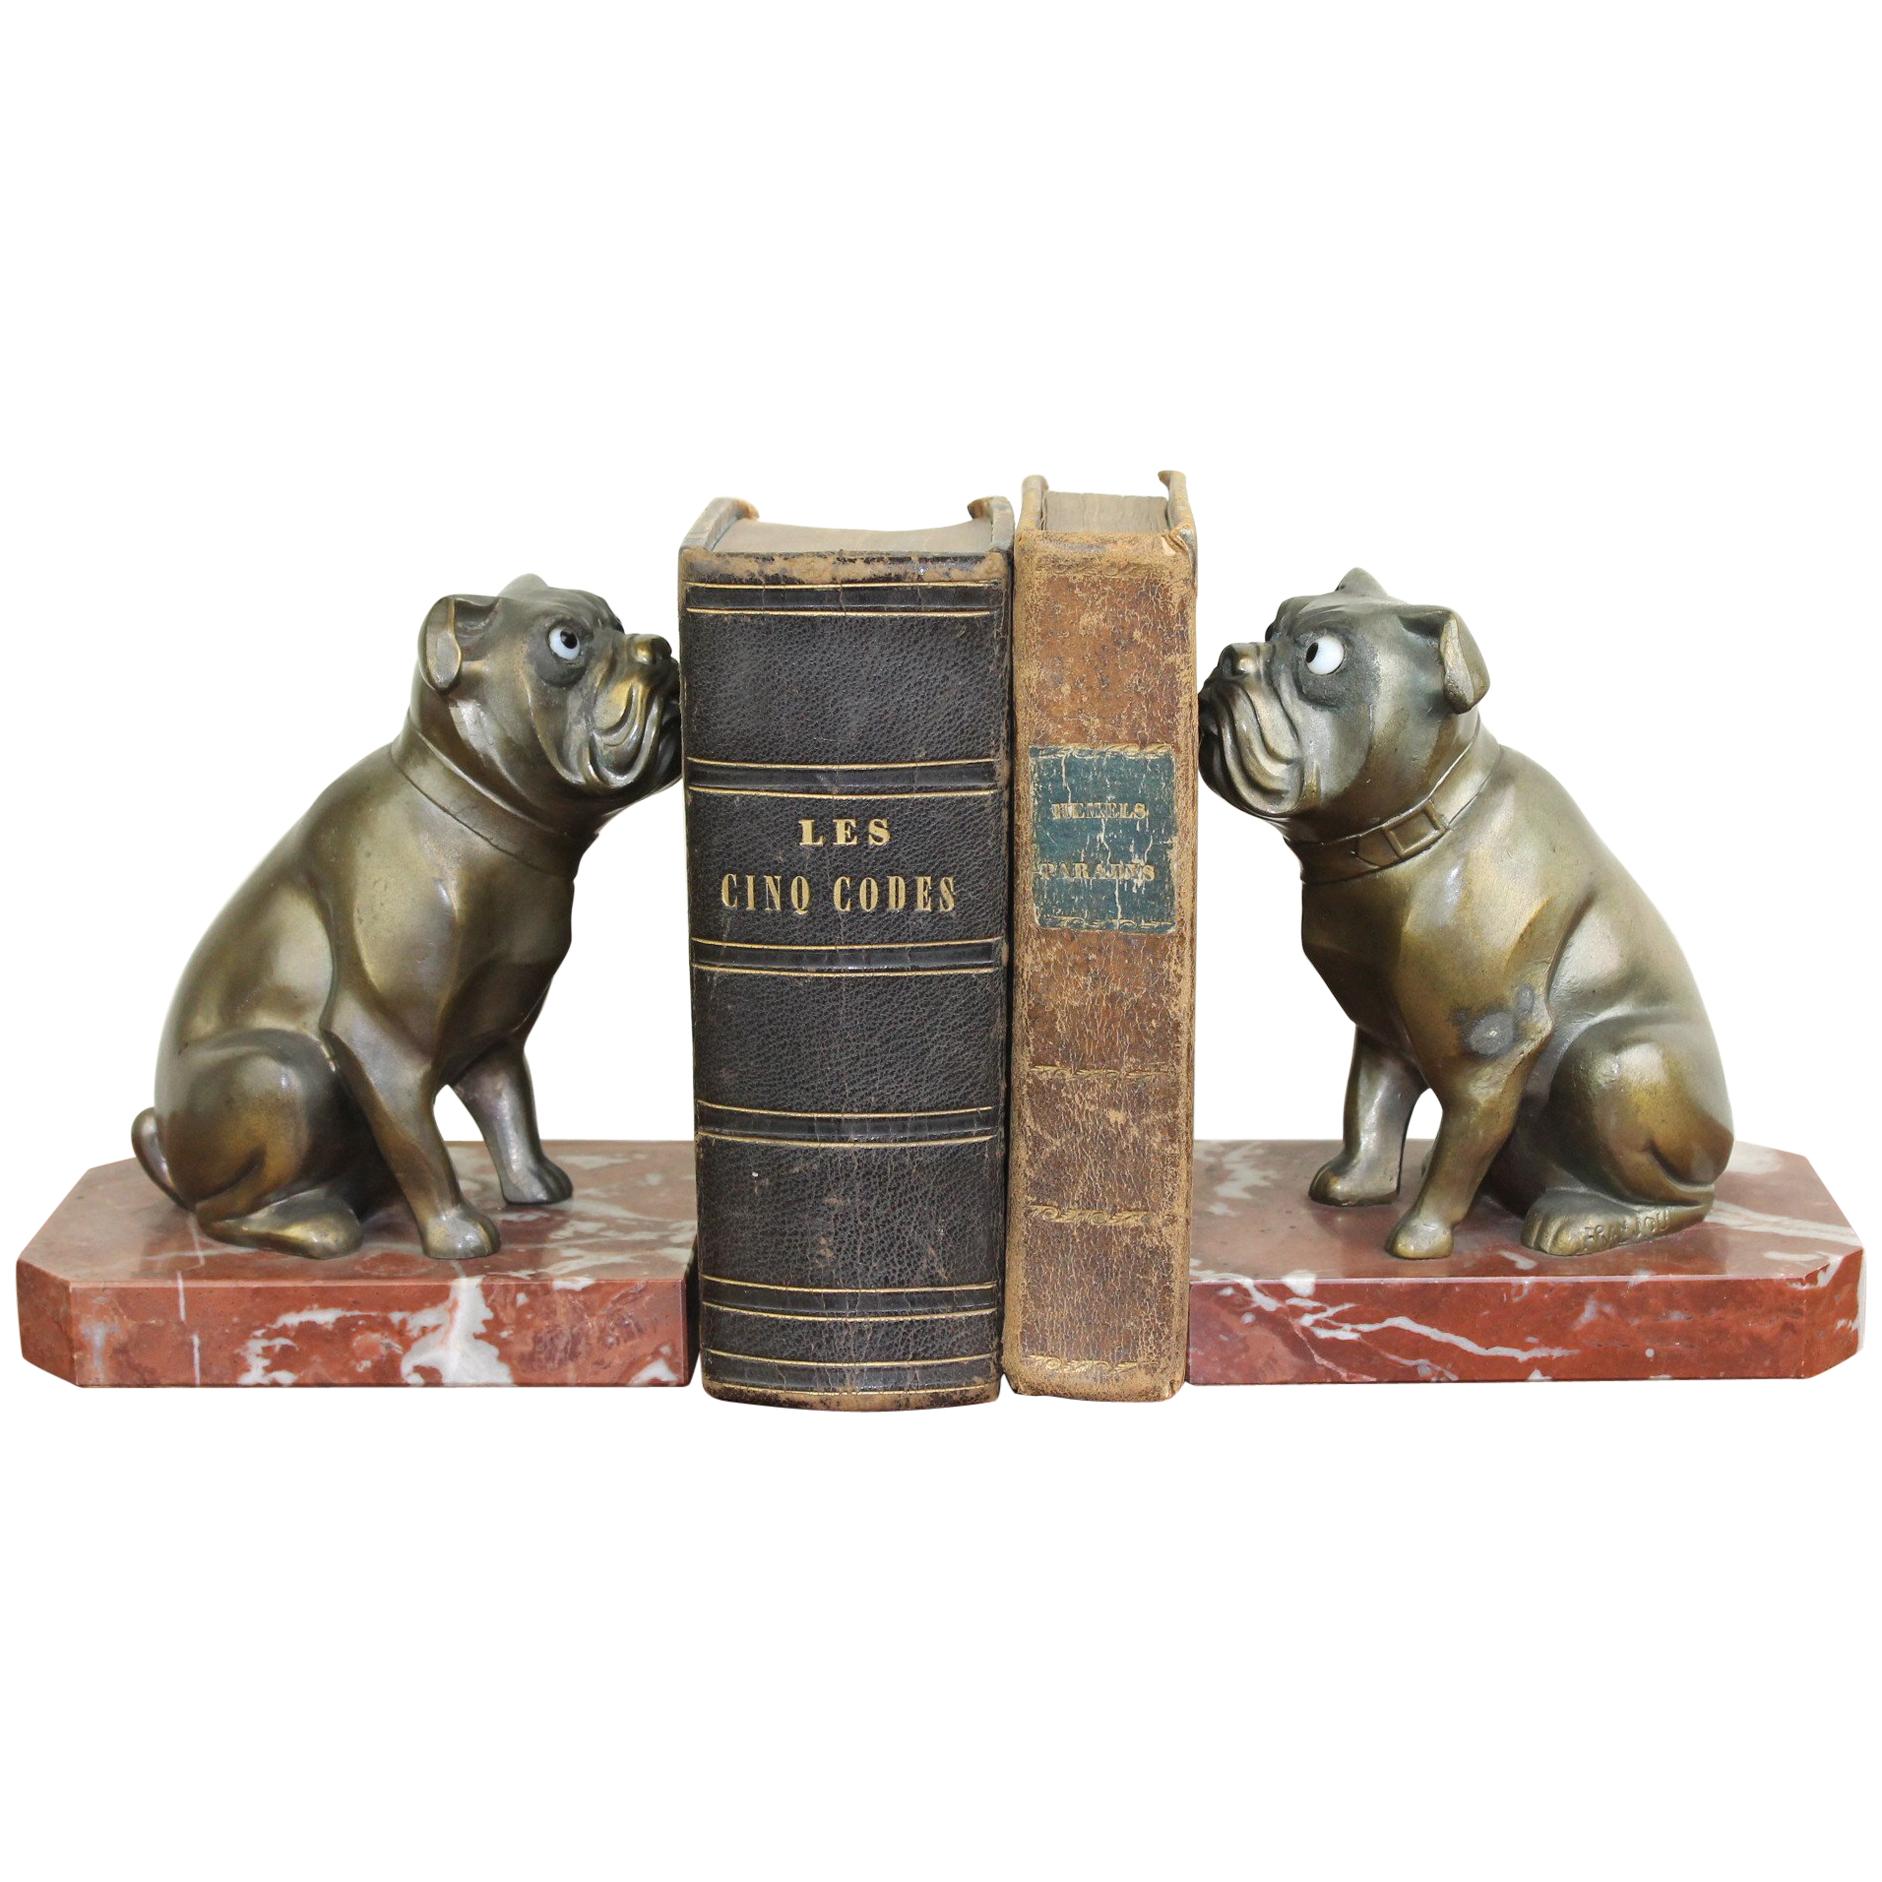 Art Deco Bulldog Bookends by Franjou, France